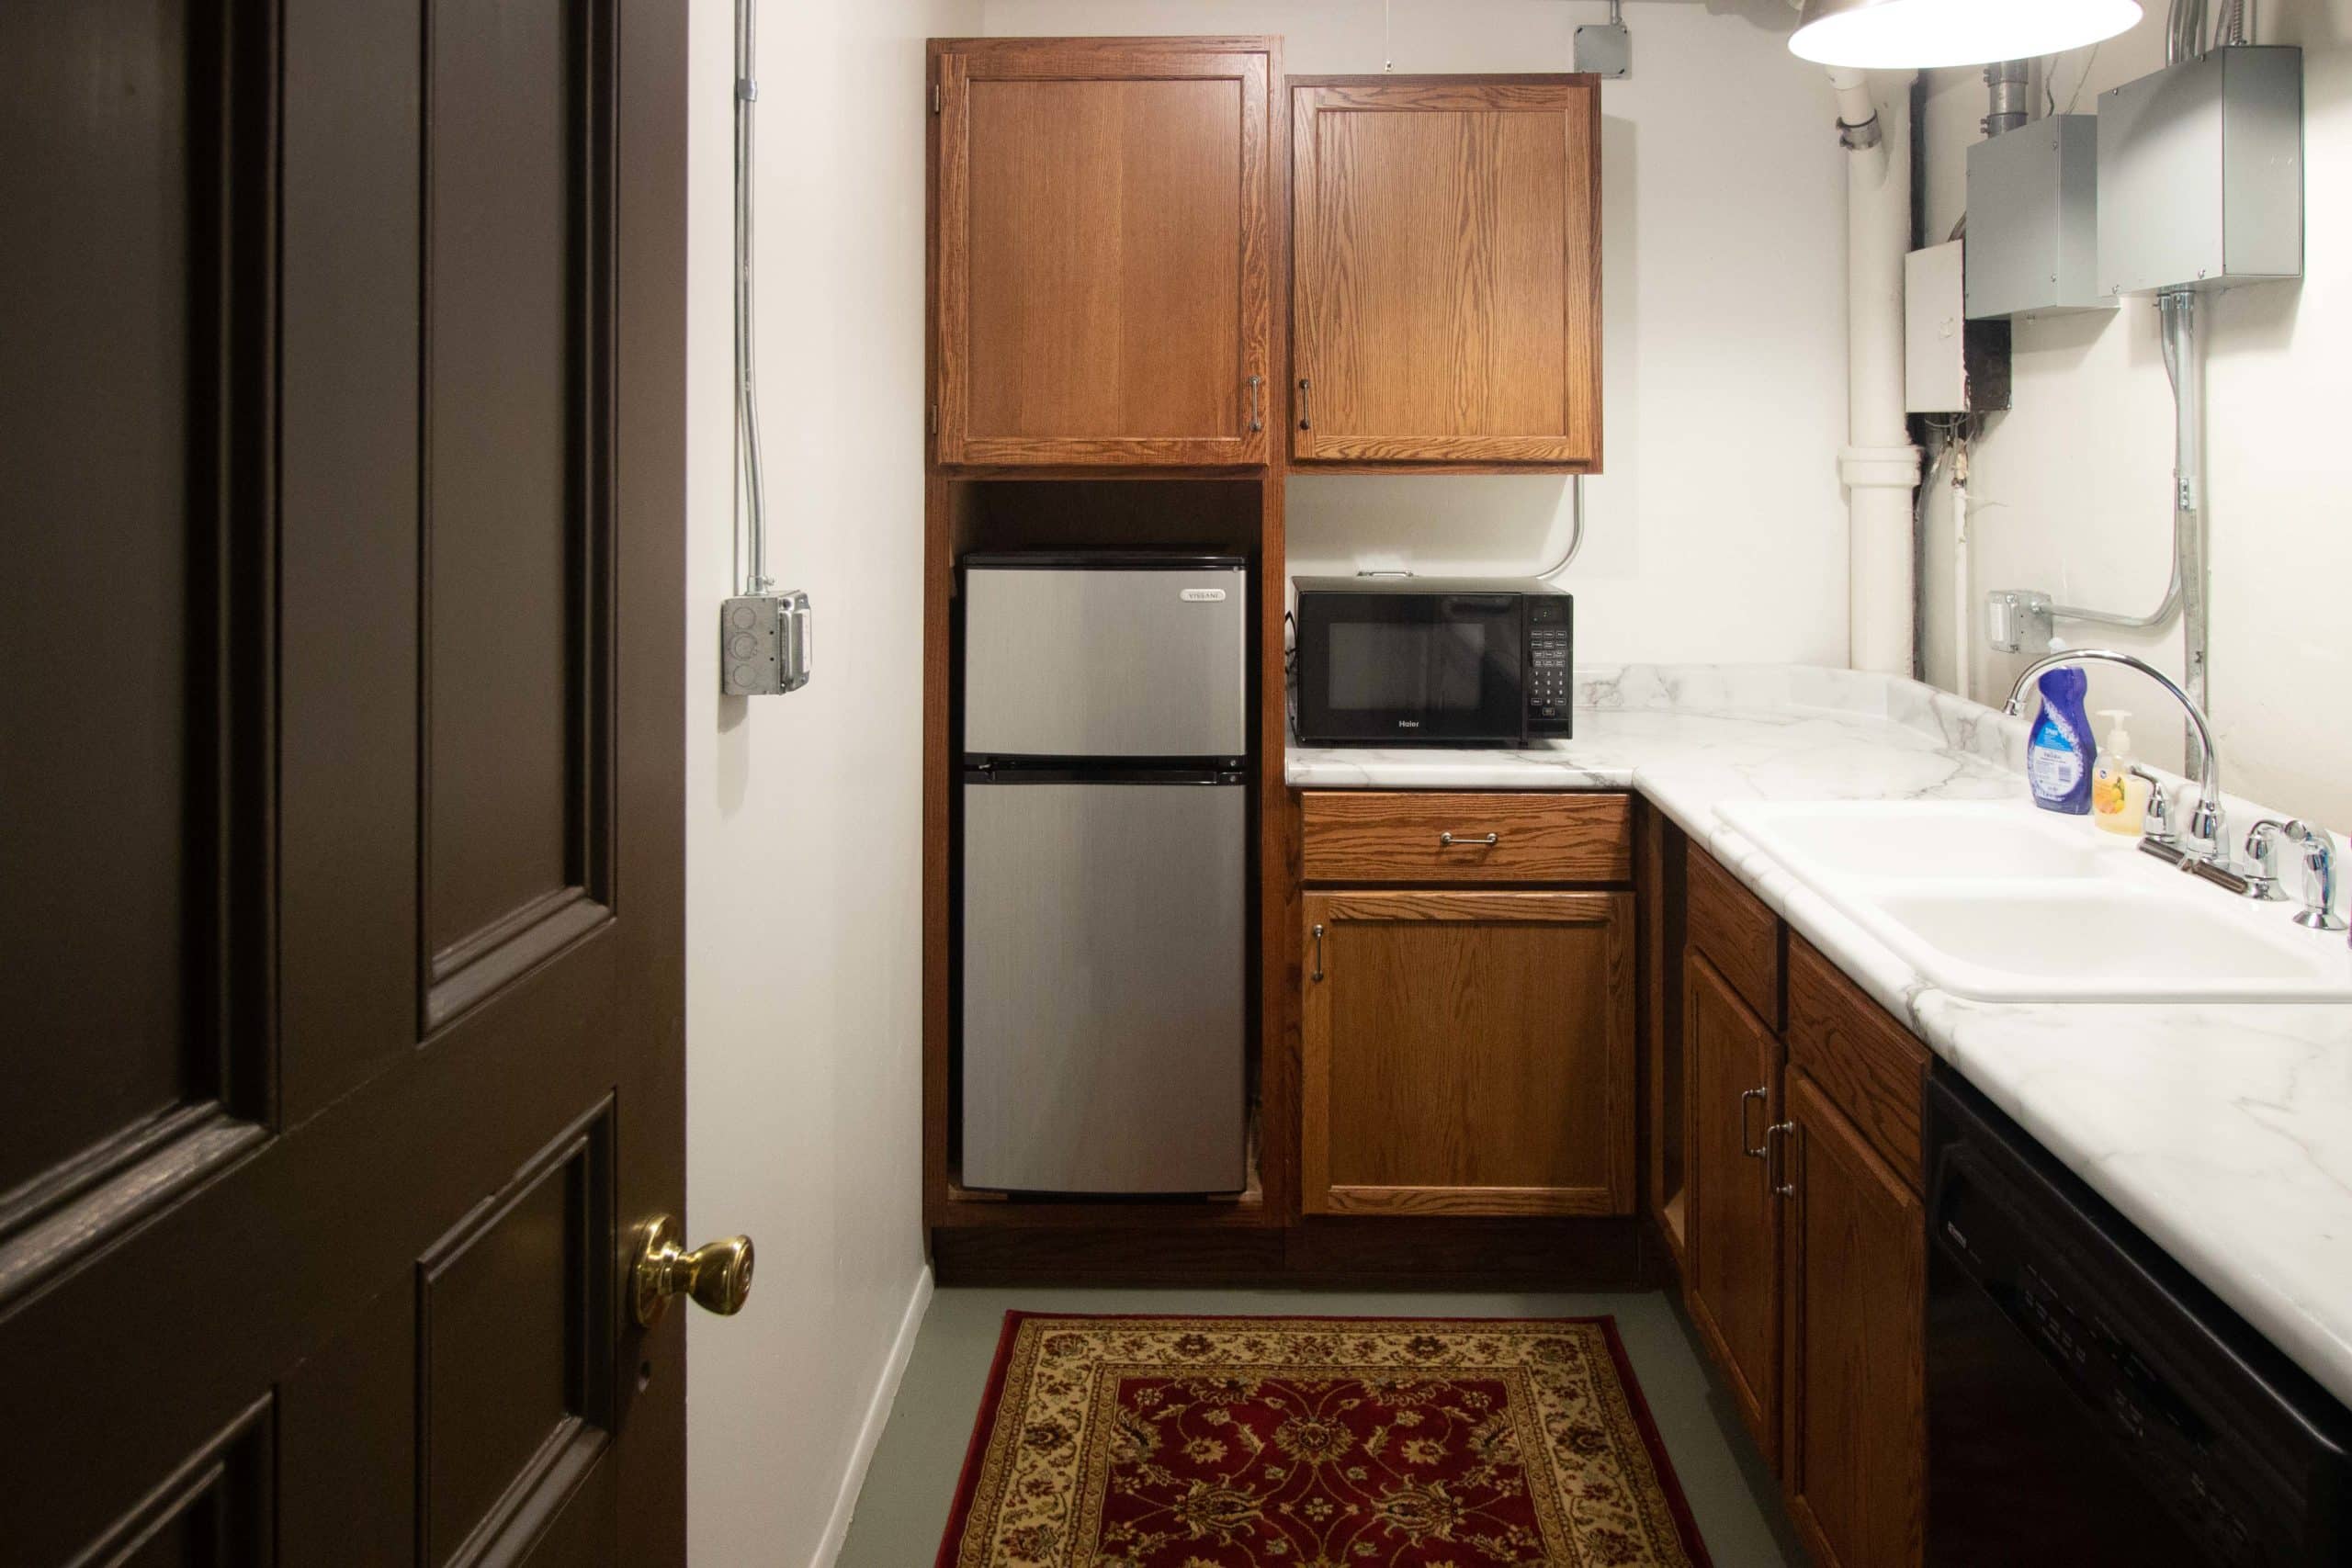 kitchenette in the utility room